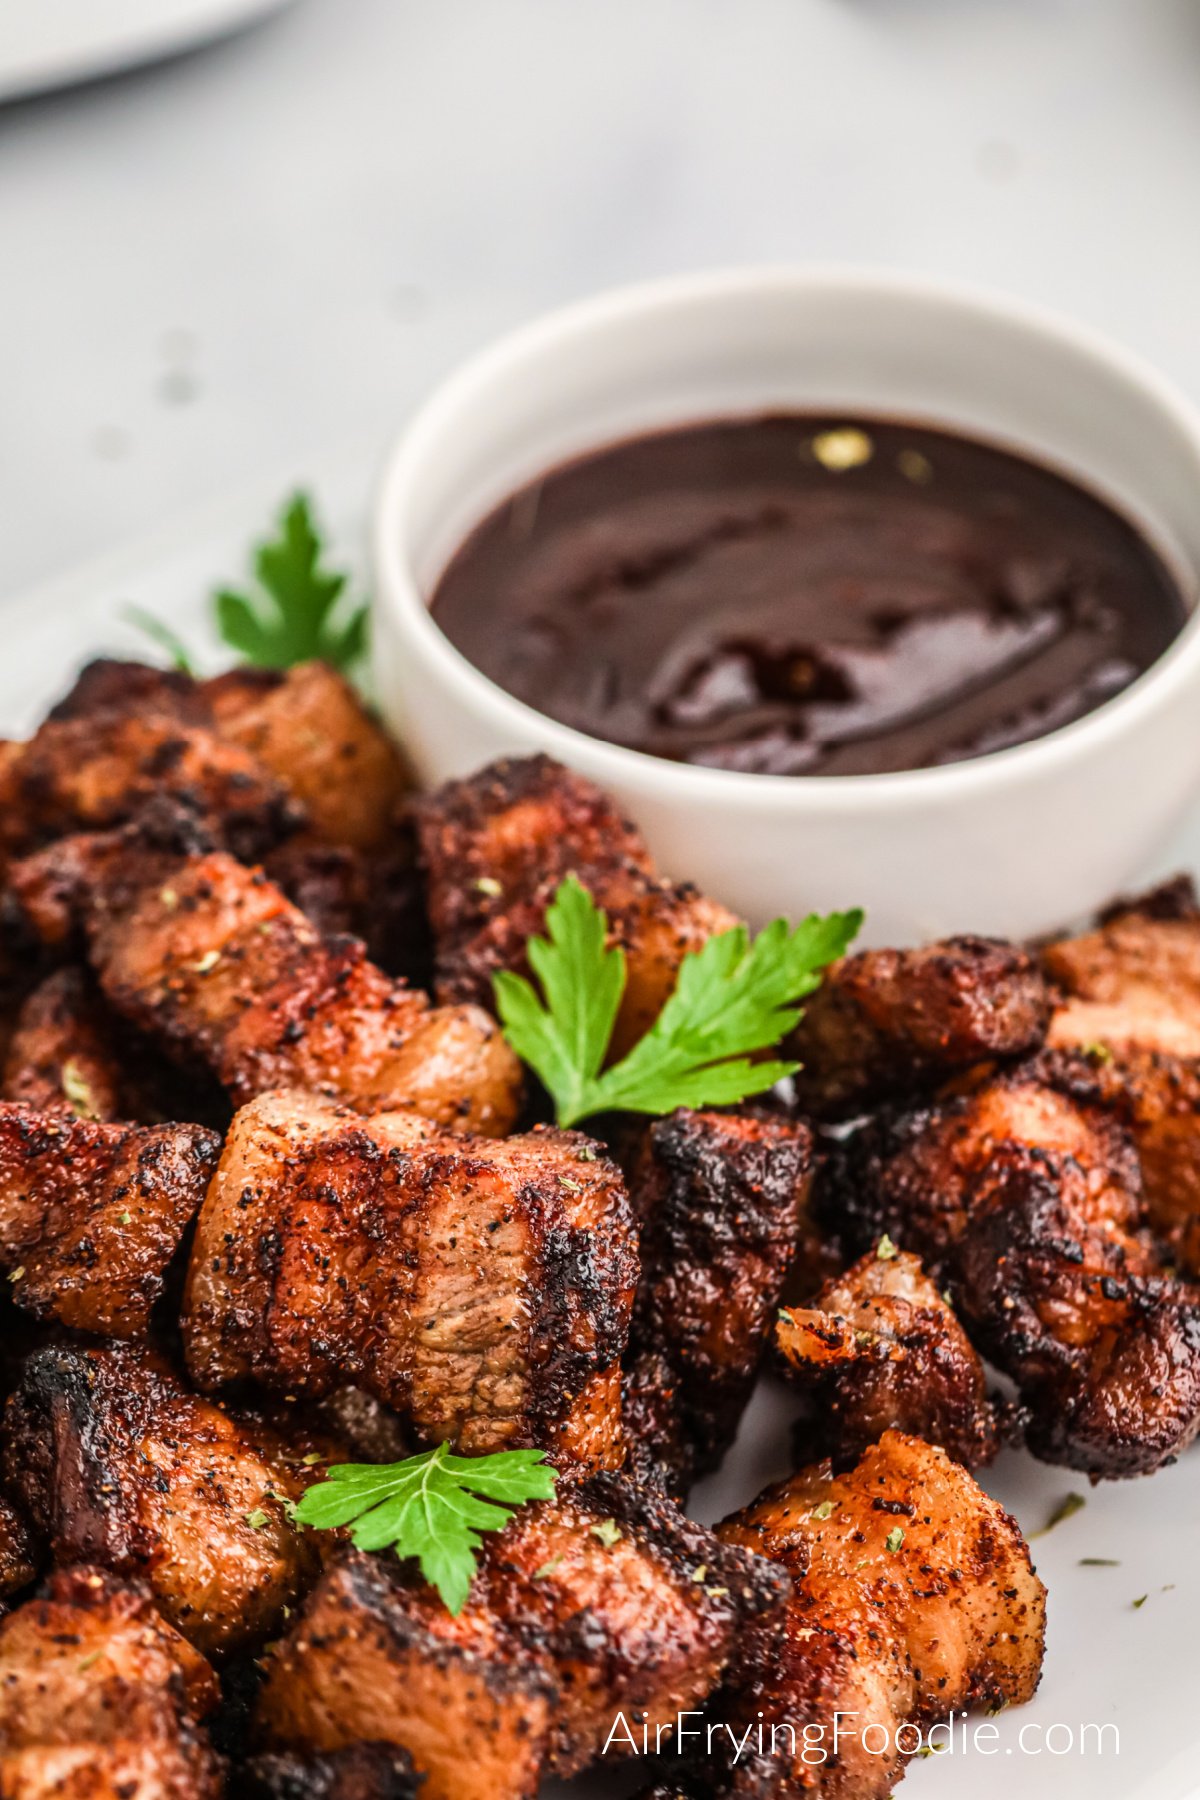 Pork belly bites on a white plate with fresh parsley and BBQ dipping sauce. Ready to serve.